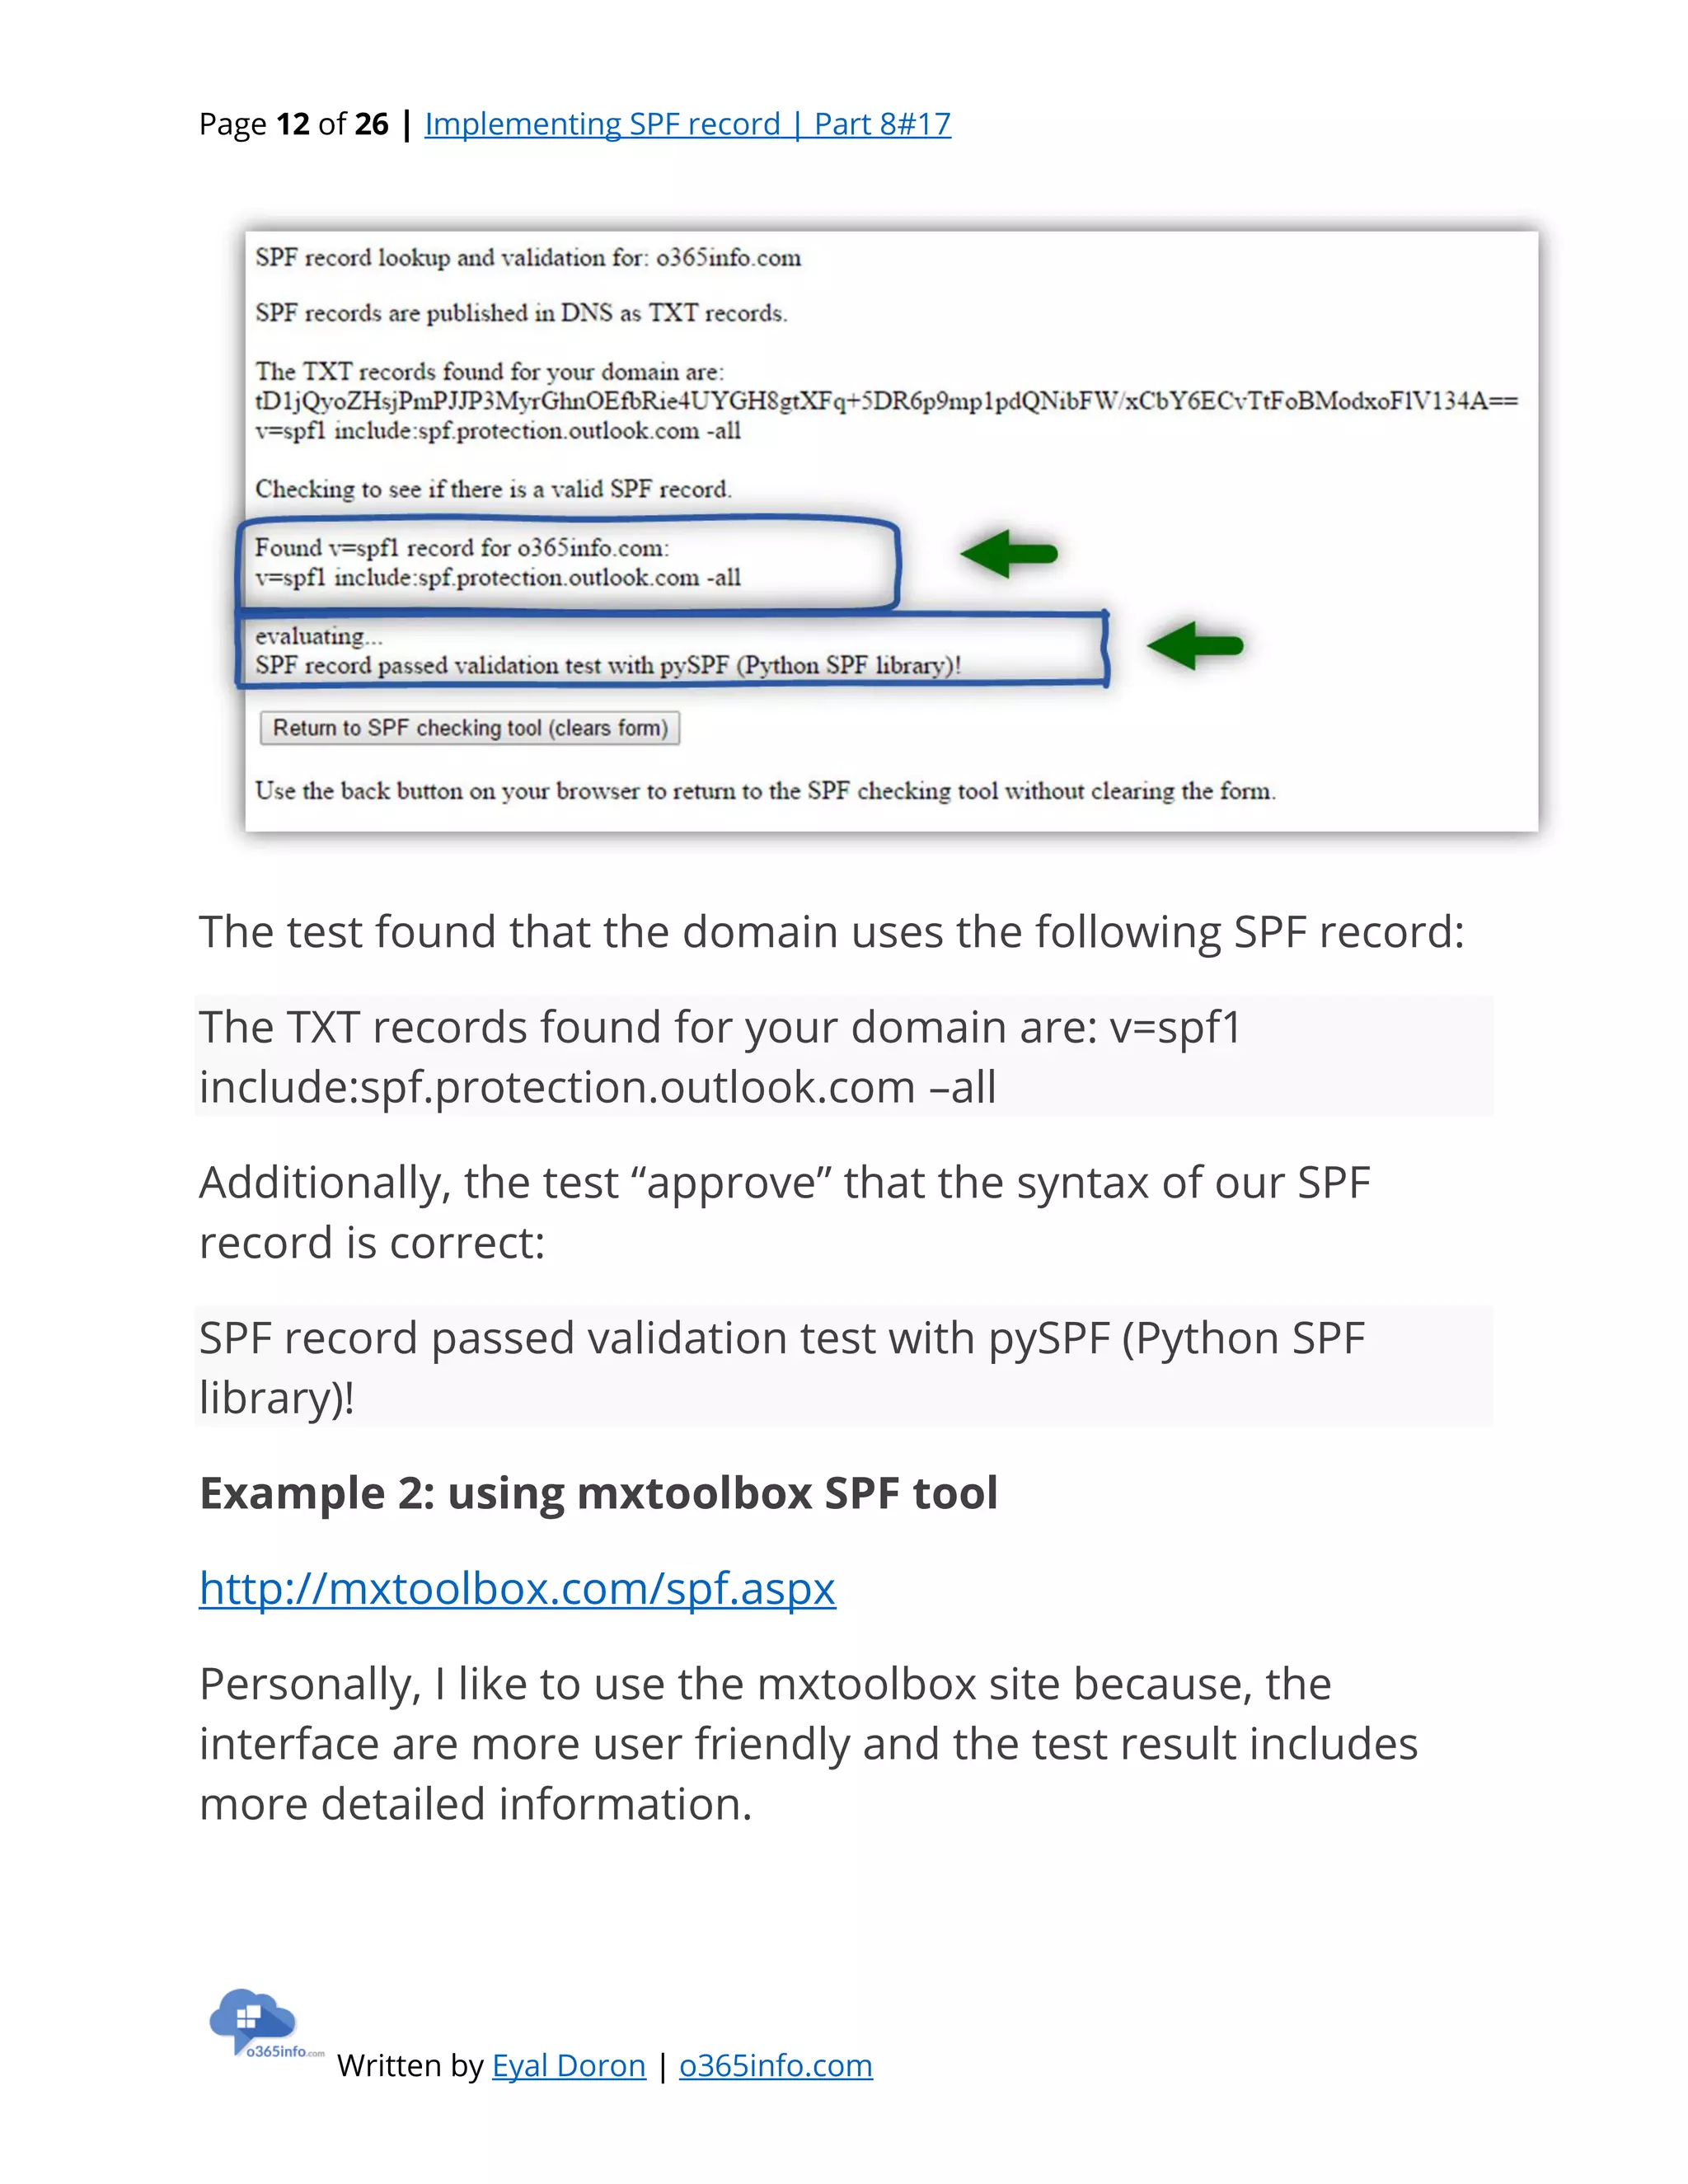 Implementing SPF record Part 8#17